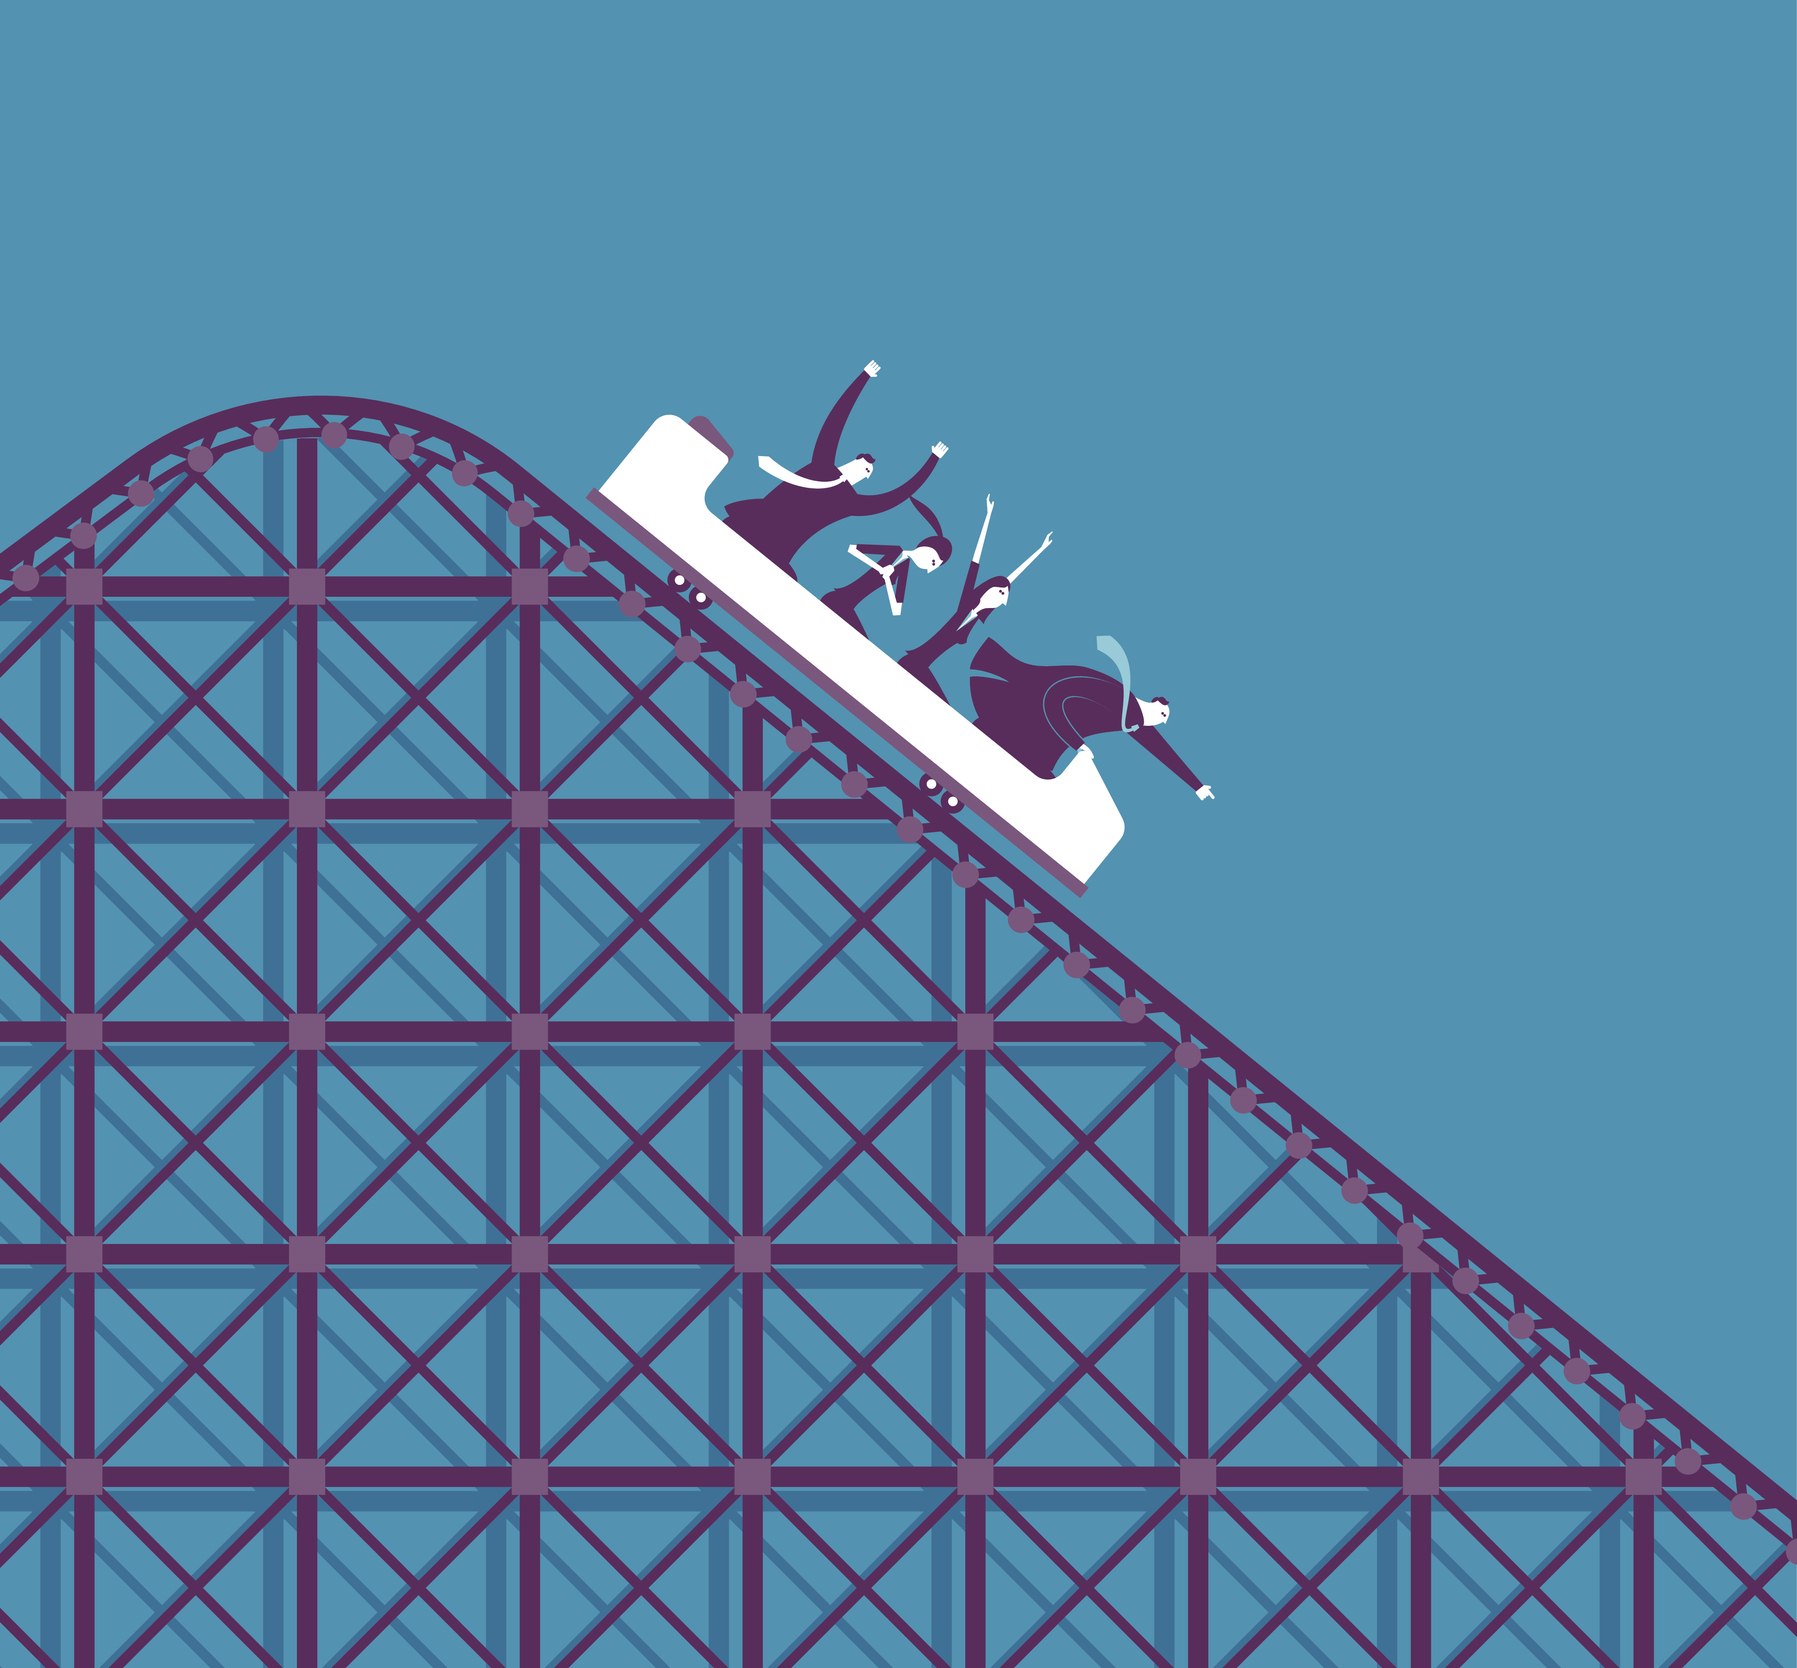 Stock Grphic of a Roller Coaster Going Down the Slope. Four Figures Are in The Coaster In Suits and Waving Their Arms